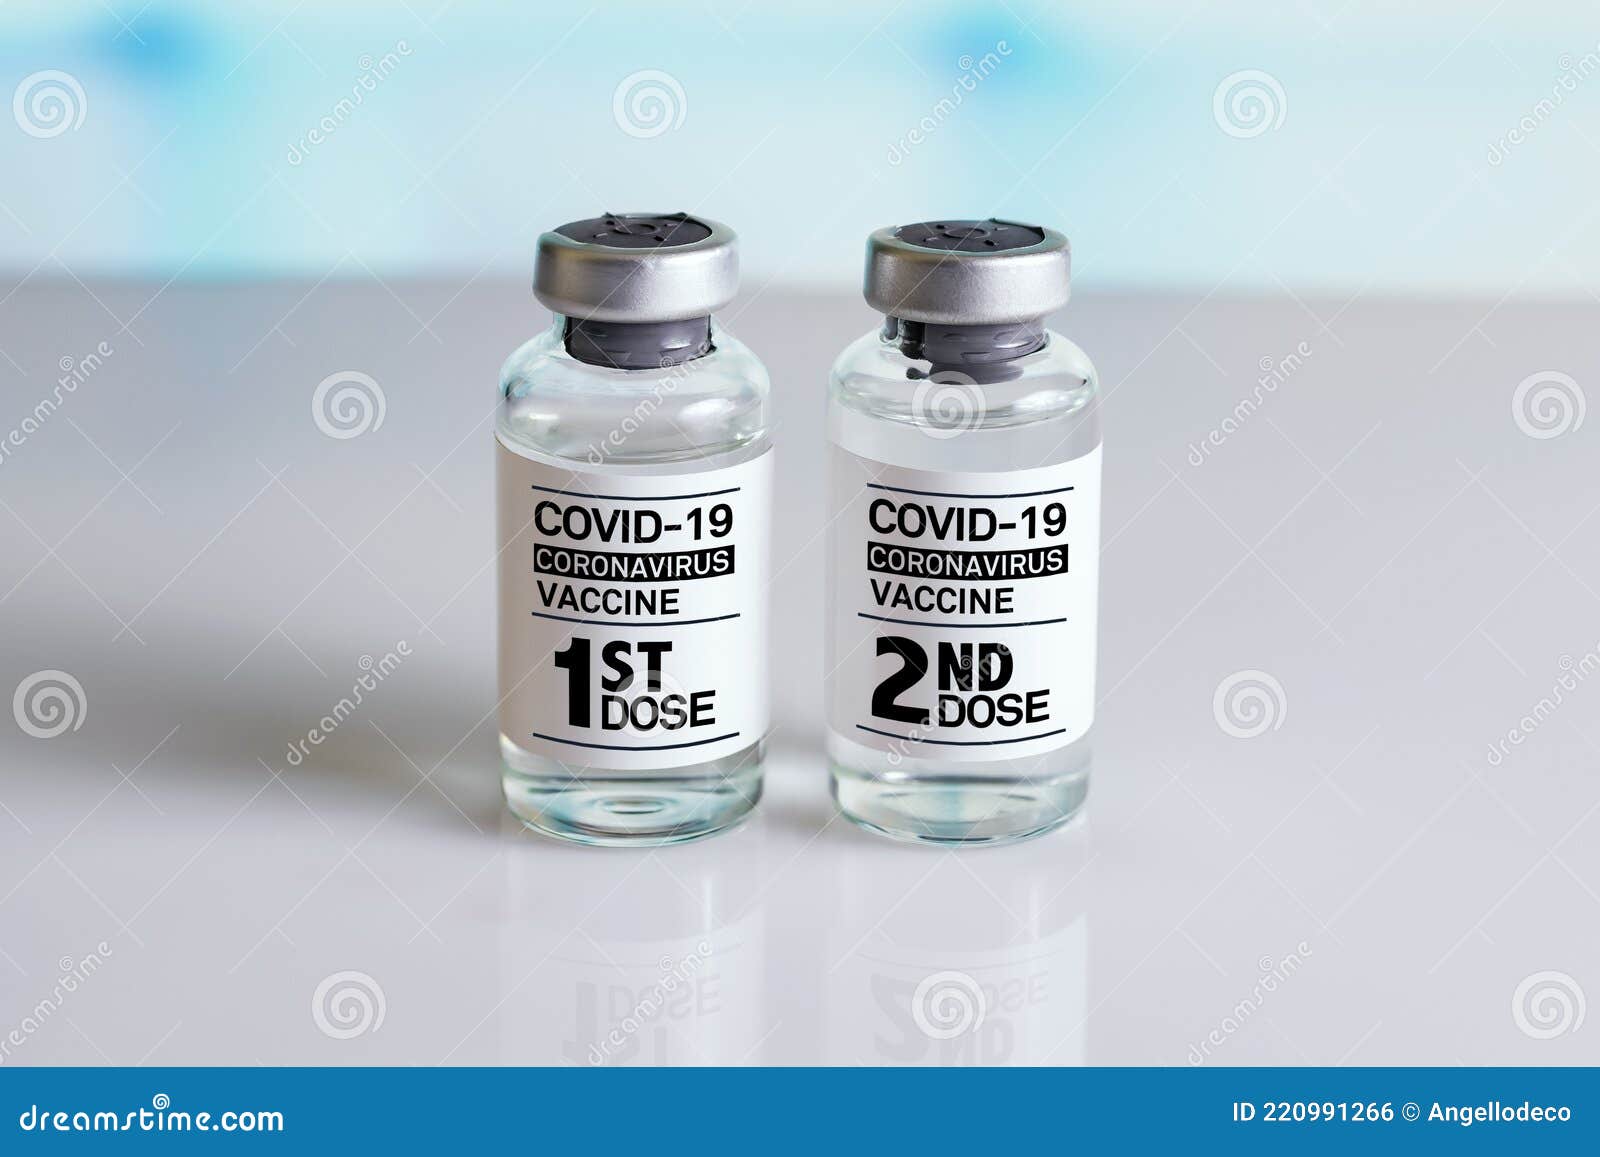 covid-19 vaccine vials that require 2 injections tagged with 1st 2nd dose